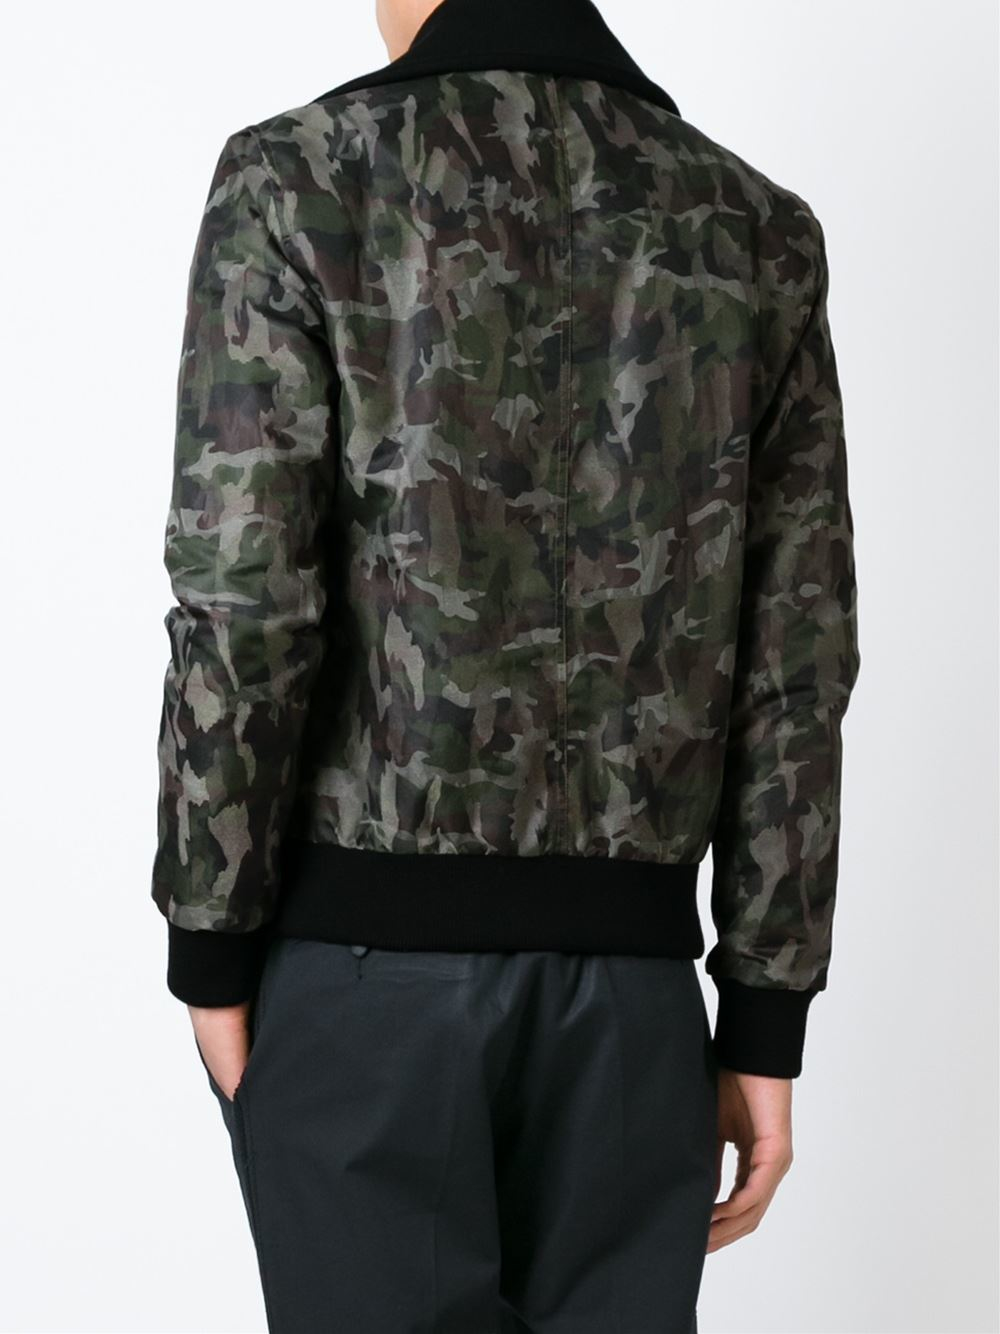 Dolce & Gabbana Camouflage Jacket in Green for Men - Lyst